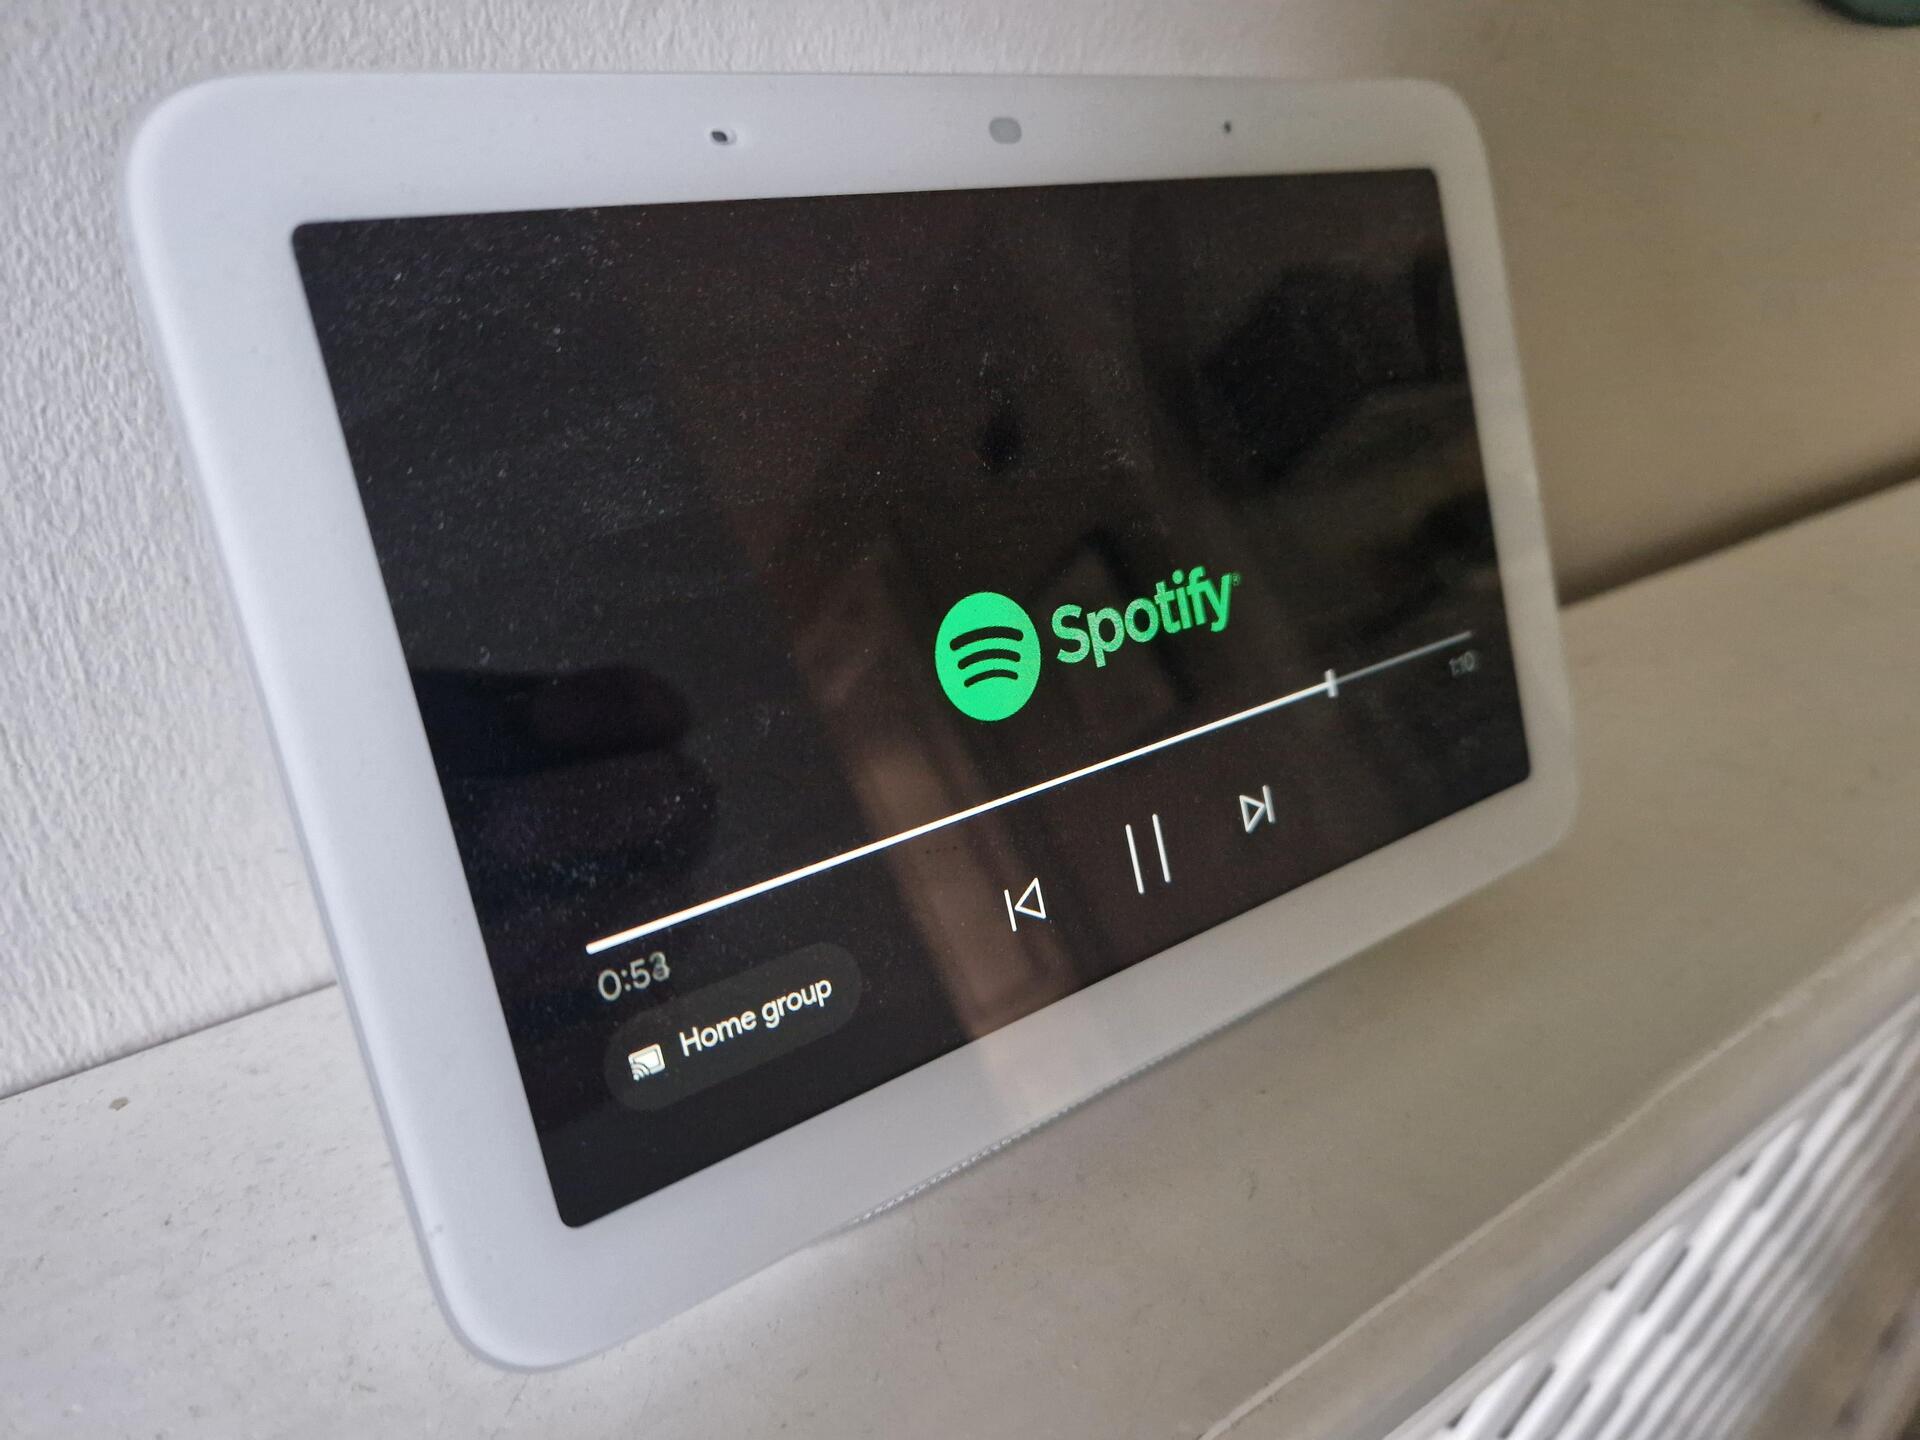 Why Won’t Spotify Connect To My Google Home?